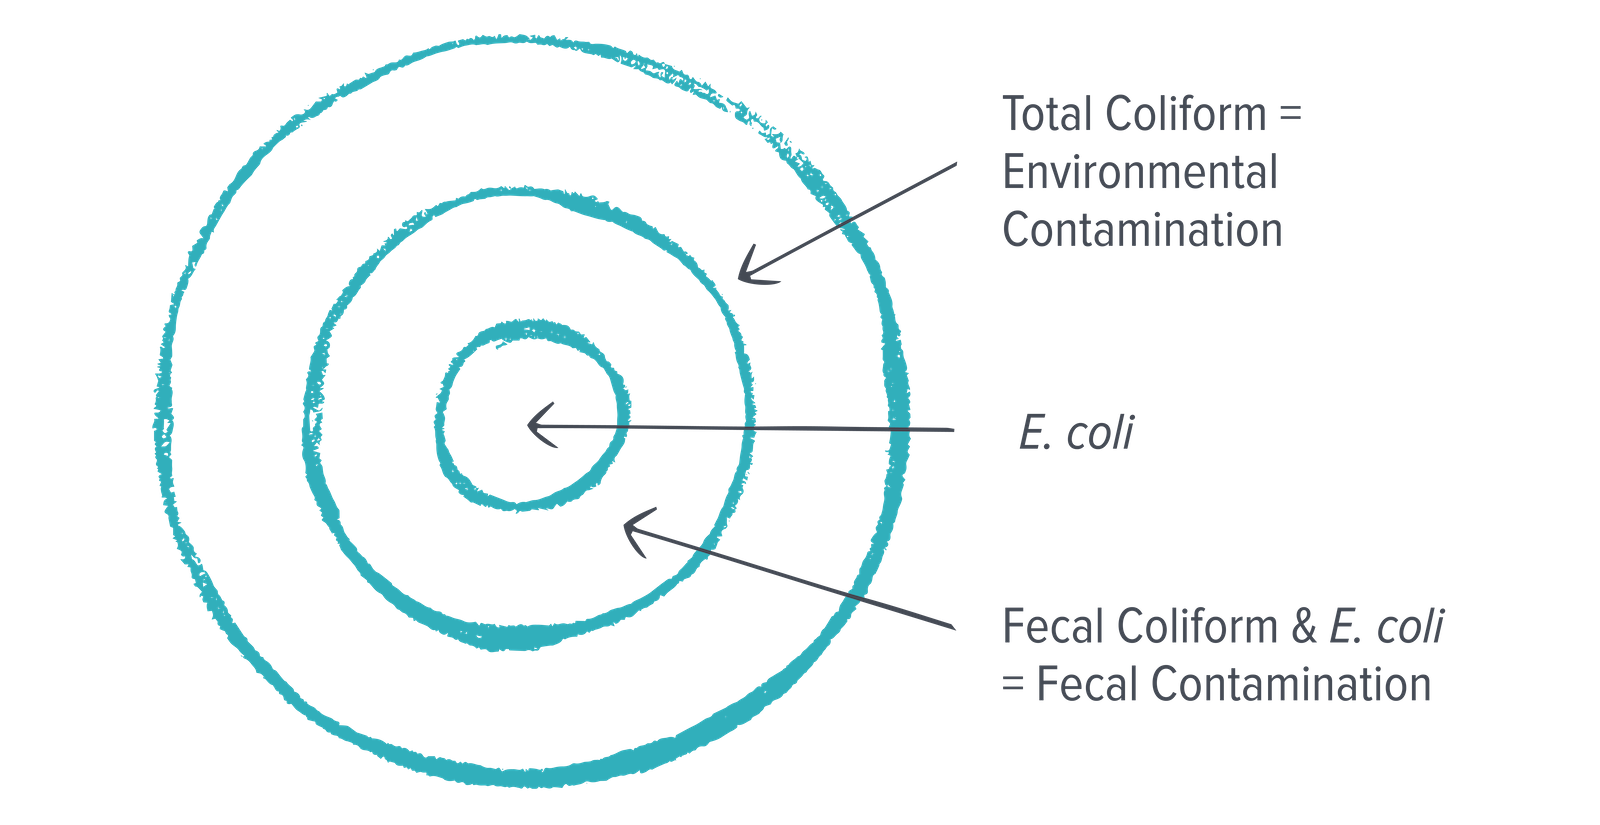 A turquoise target-like image showing an arrow to the outer ring with the label "Total Coliform = Environmental Contamination", the second label "E. coli" points to the center ring and the third label points to the middle ring with the label "Fecal Coliform & E. coli = Fecal Contamination".